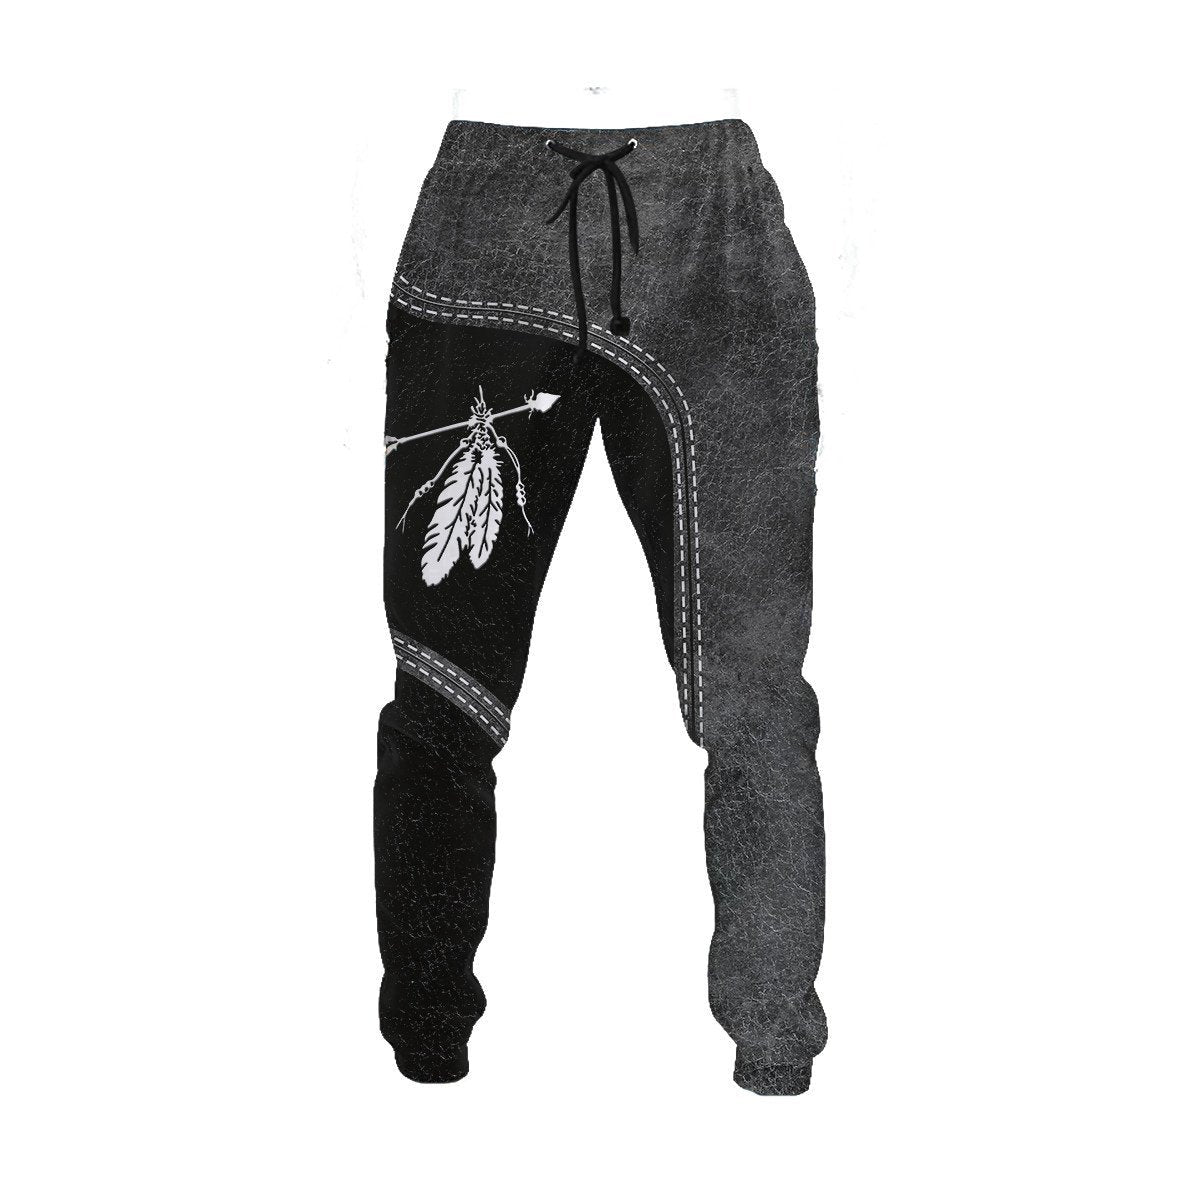 customize-name-native-american-all-over-printed-unisex-sweatpants